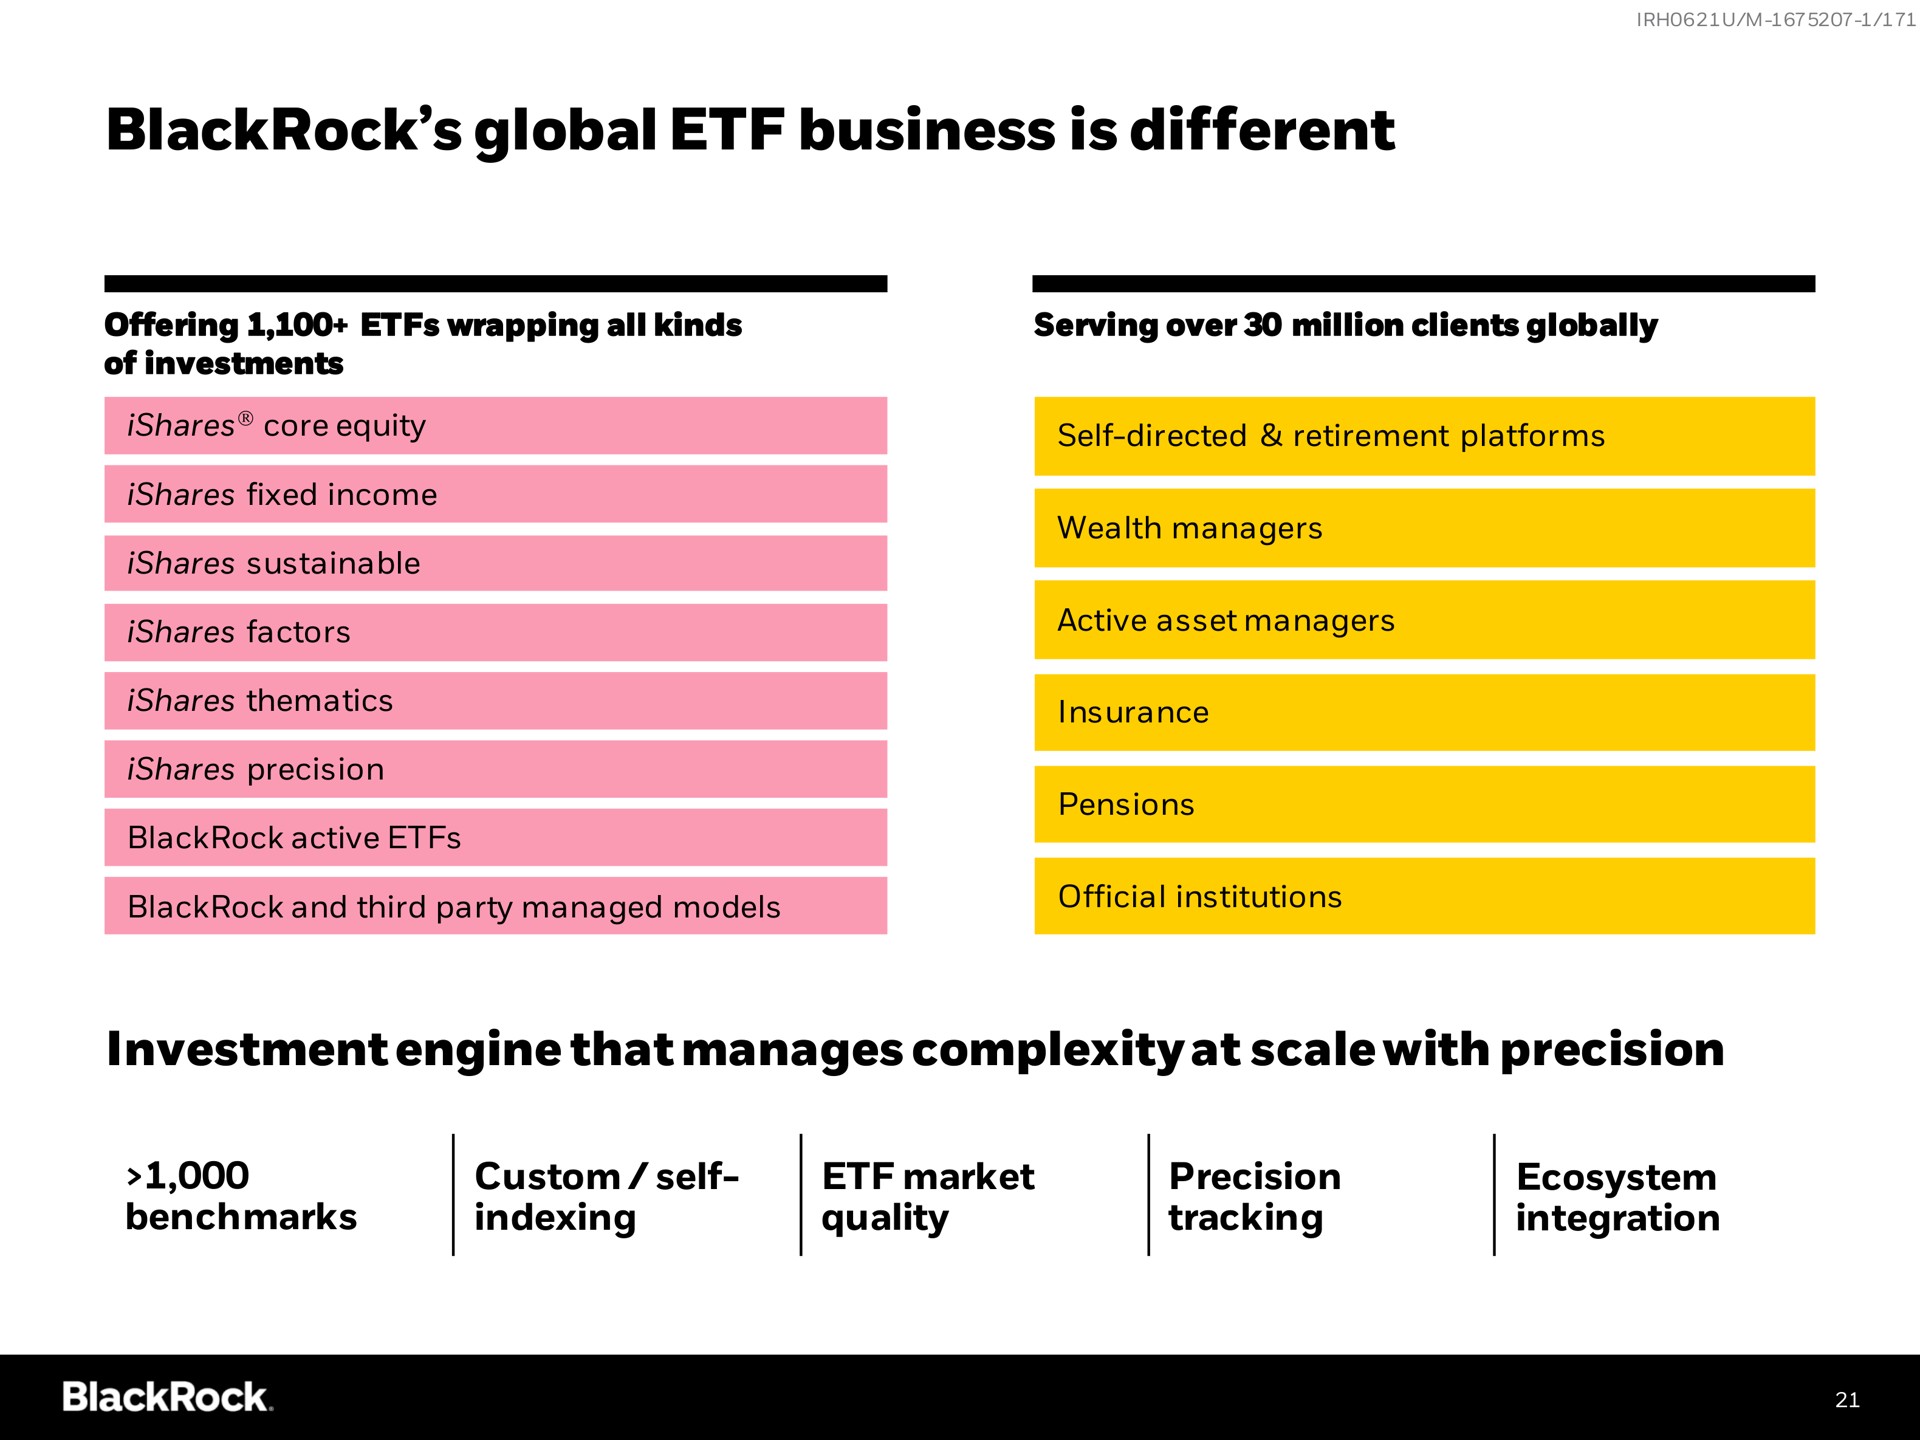 global business is different investment engine that manages complexity at scale with precision | BlackRock